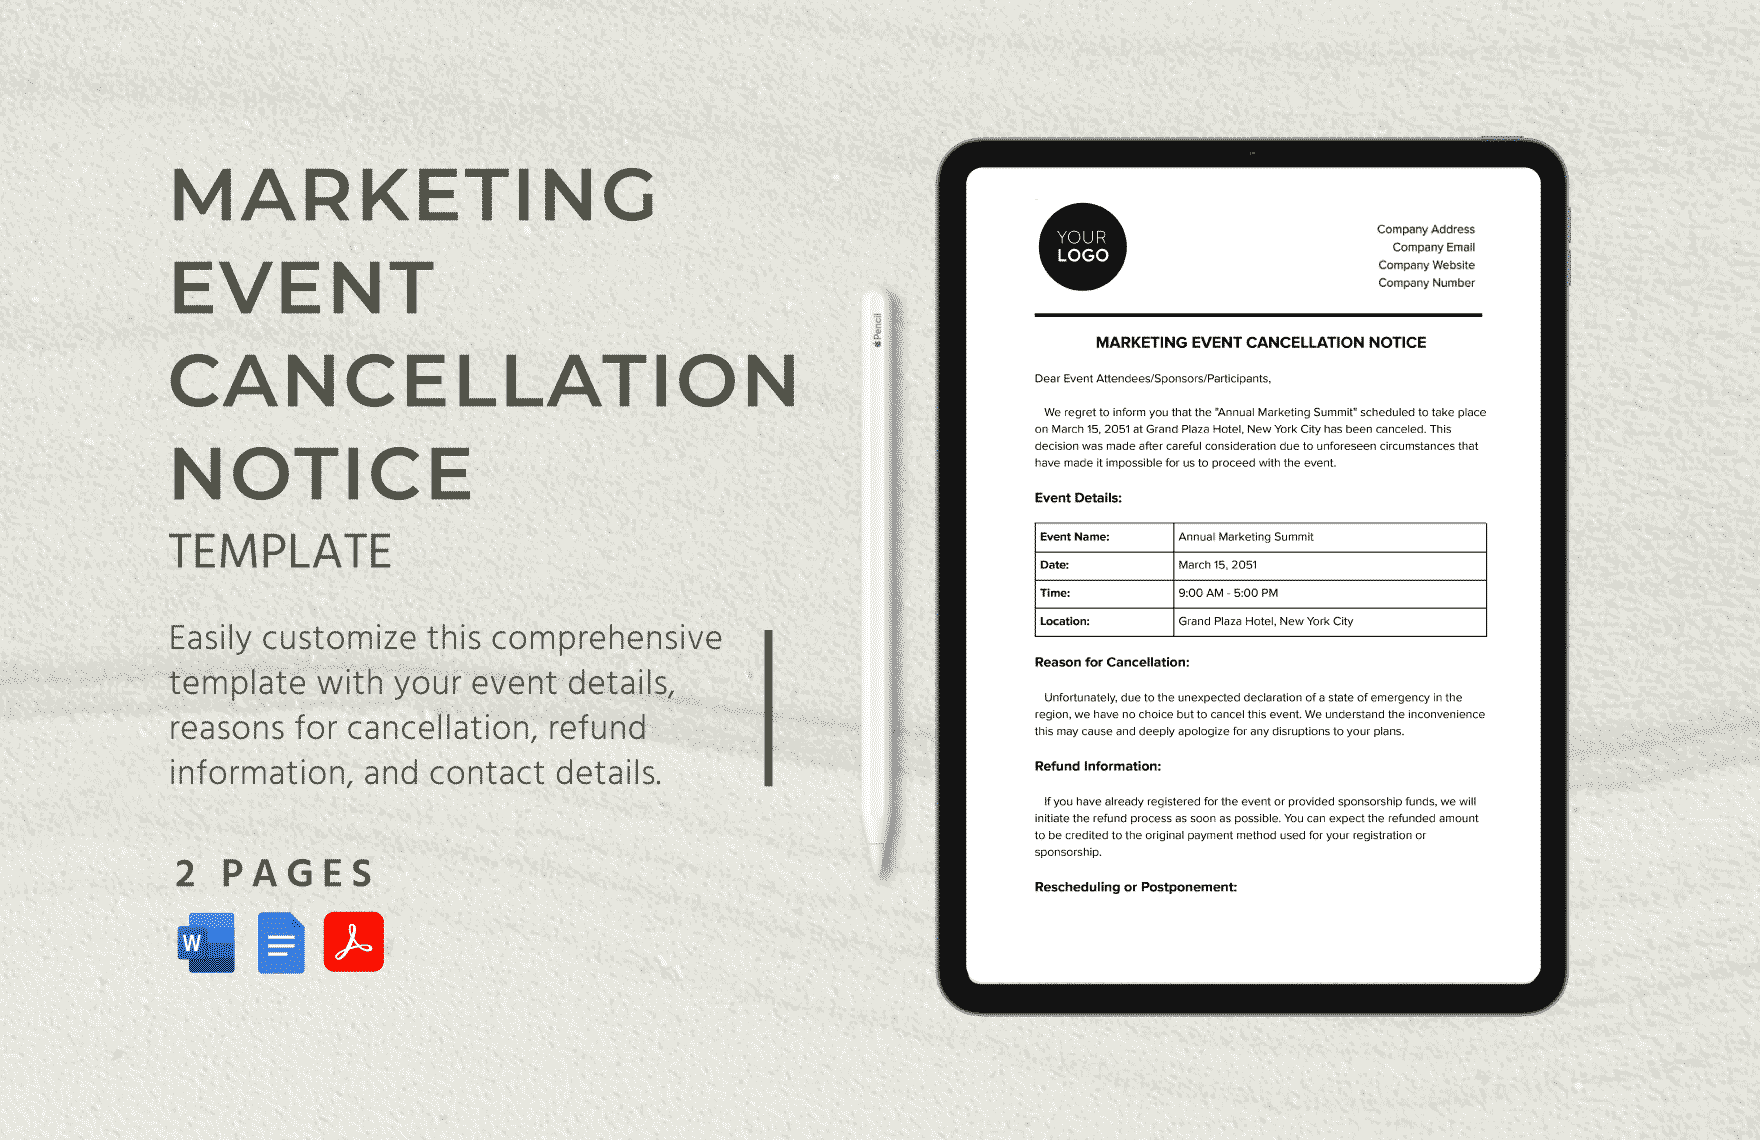 Marketing Event Cancellation Notice Template in Word, Google Docs, PDF